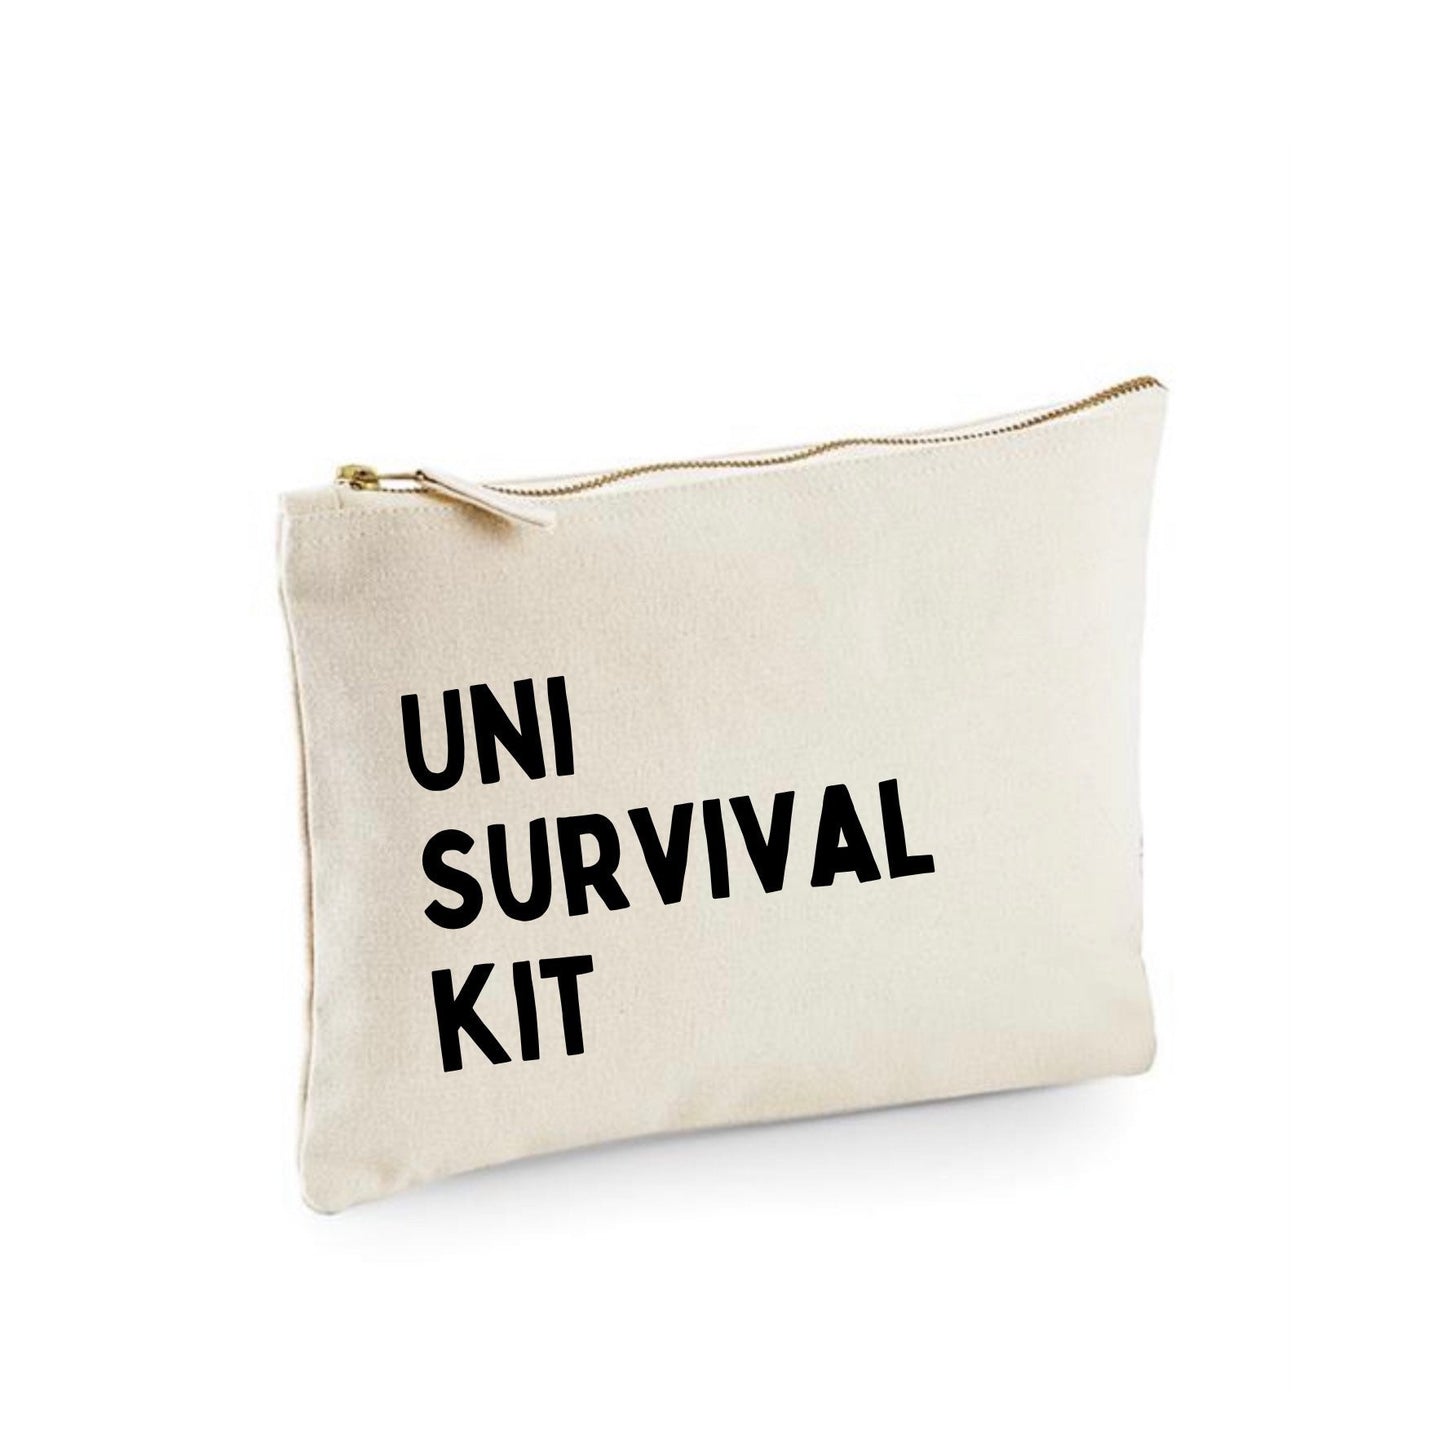 Uni survival kit pouch, good luck at university present for son or daughter, uni essentials, first year of high school gift